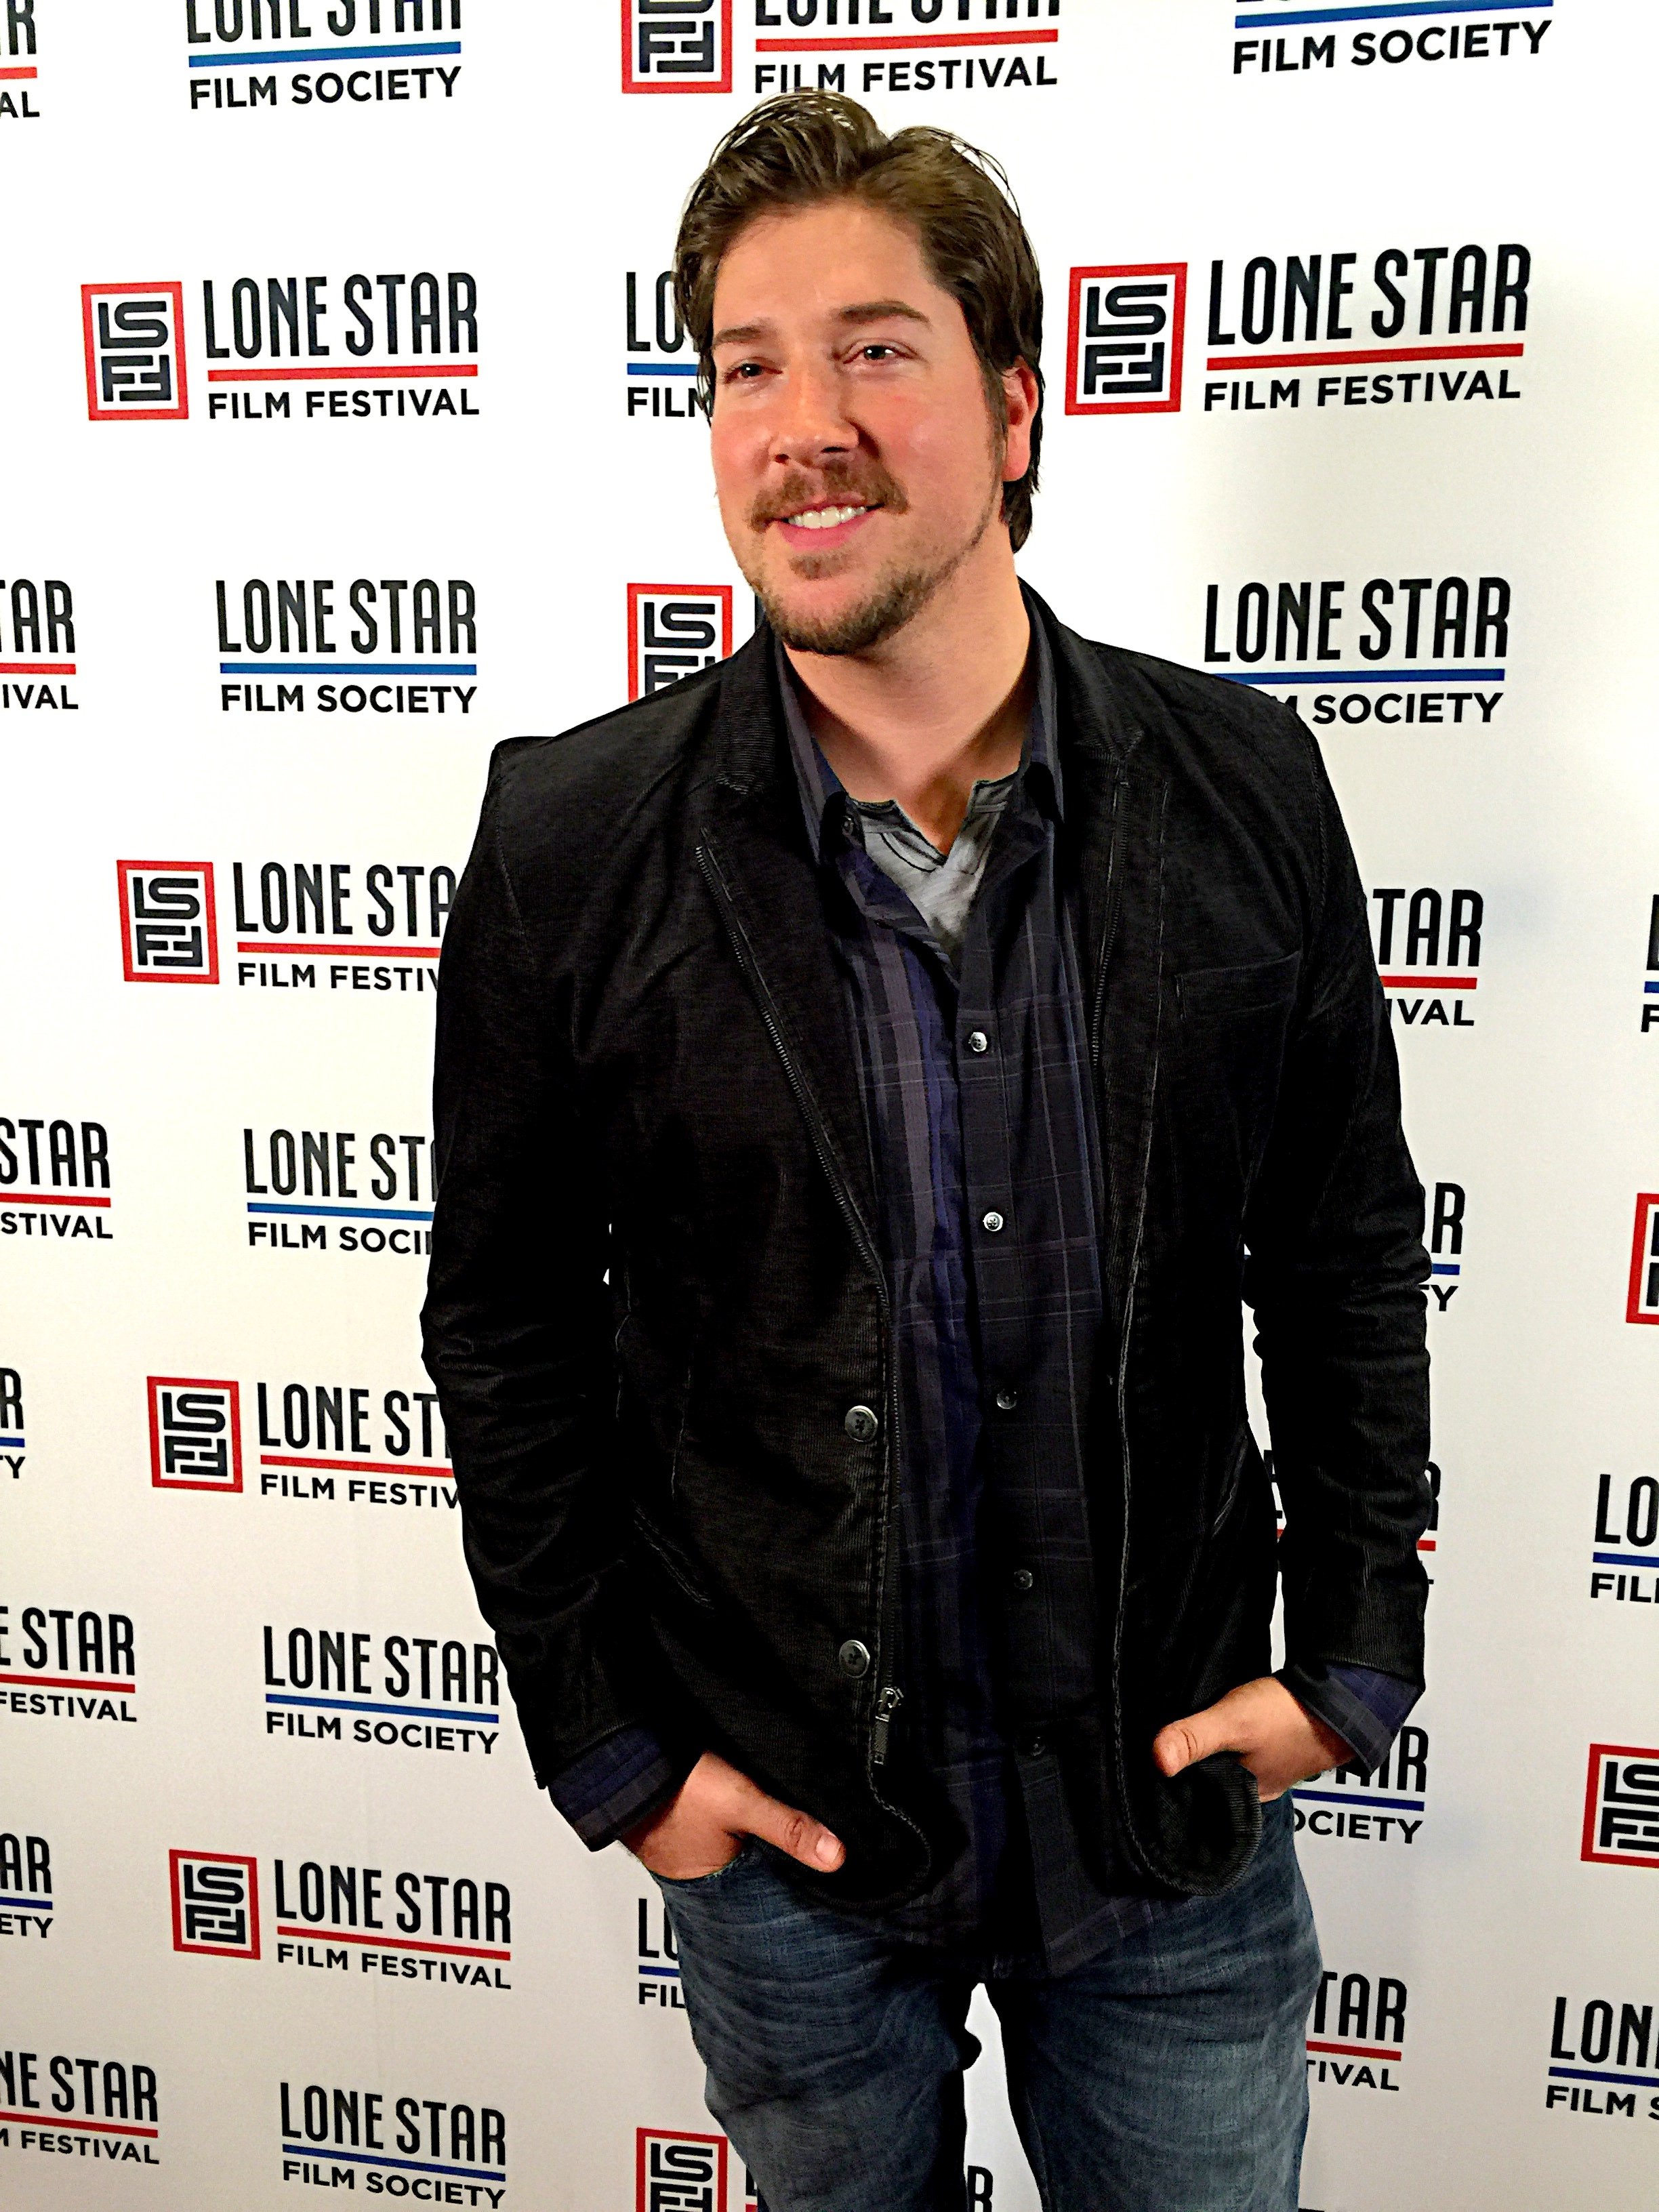 Actor/Co-Director Tanner Beard on the carpet at the Texas Premier of 